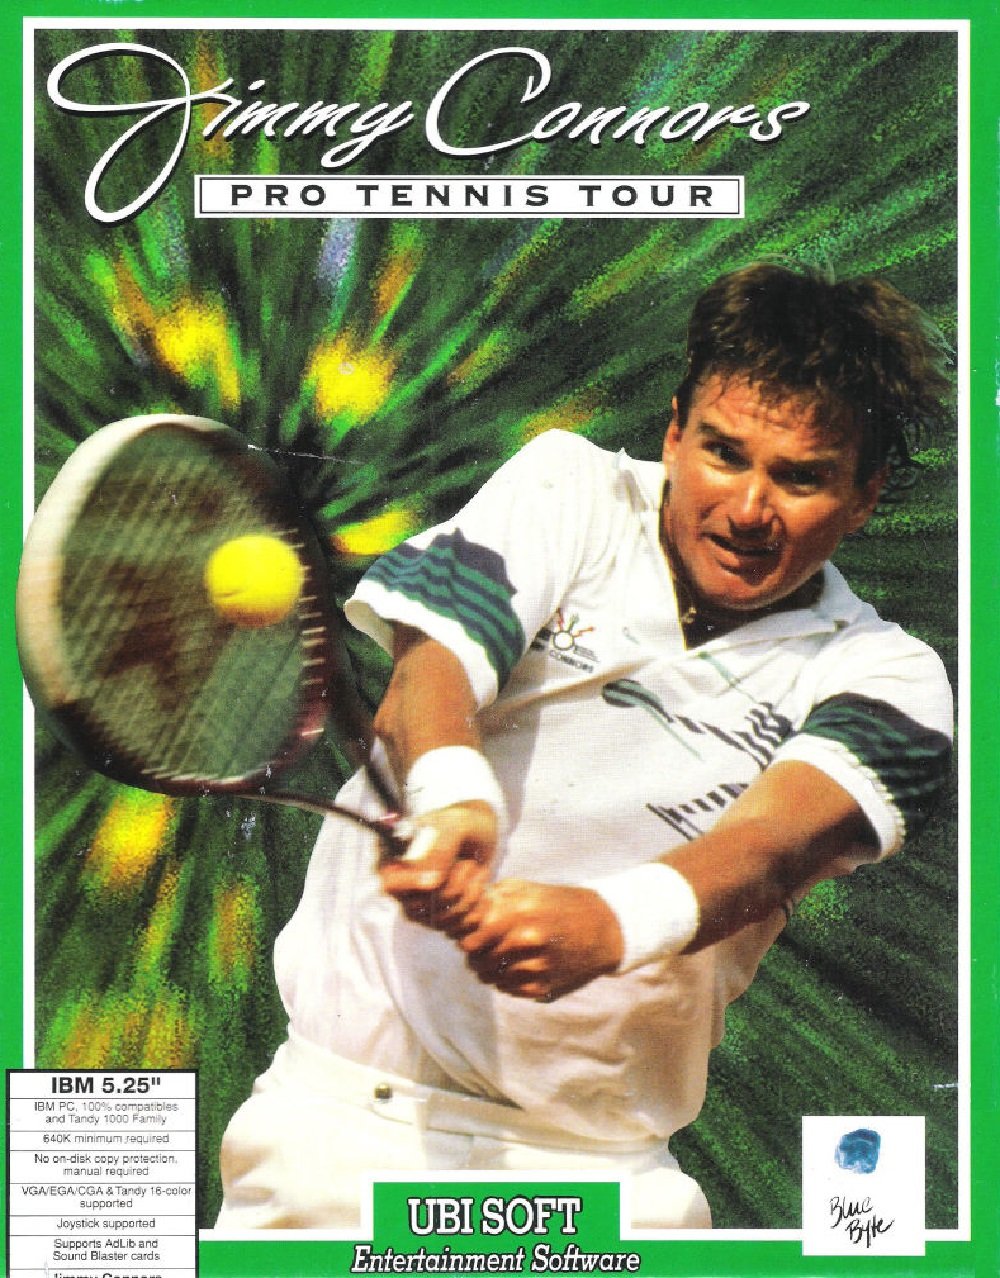 Image of Jimmy Connors Pro Tennis Tour